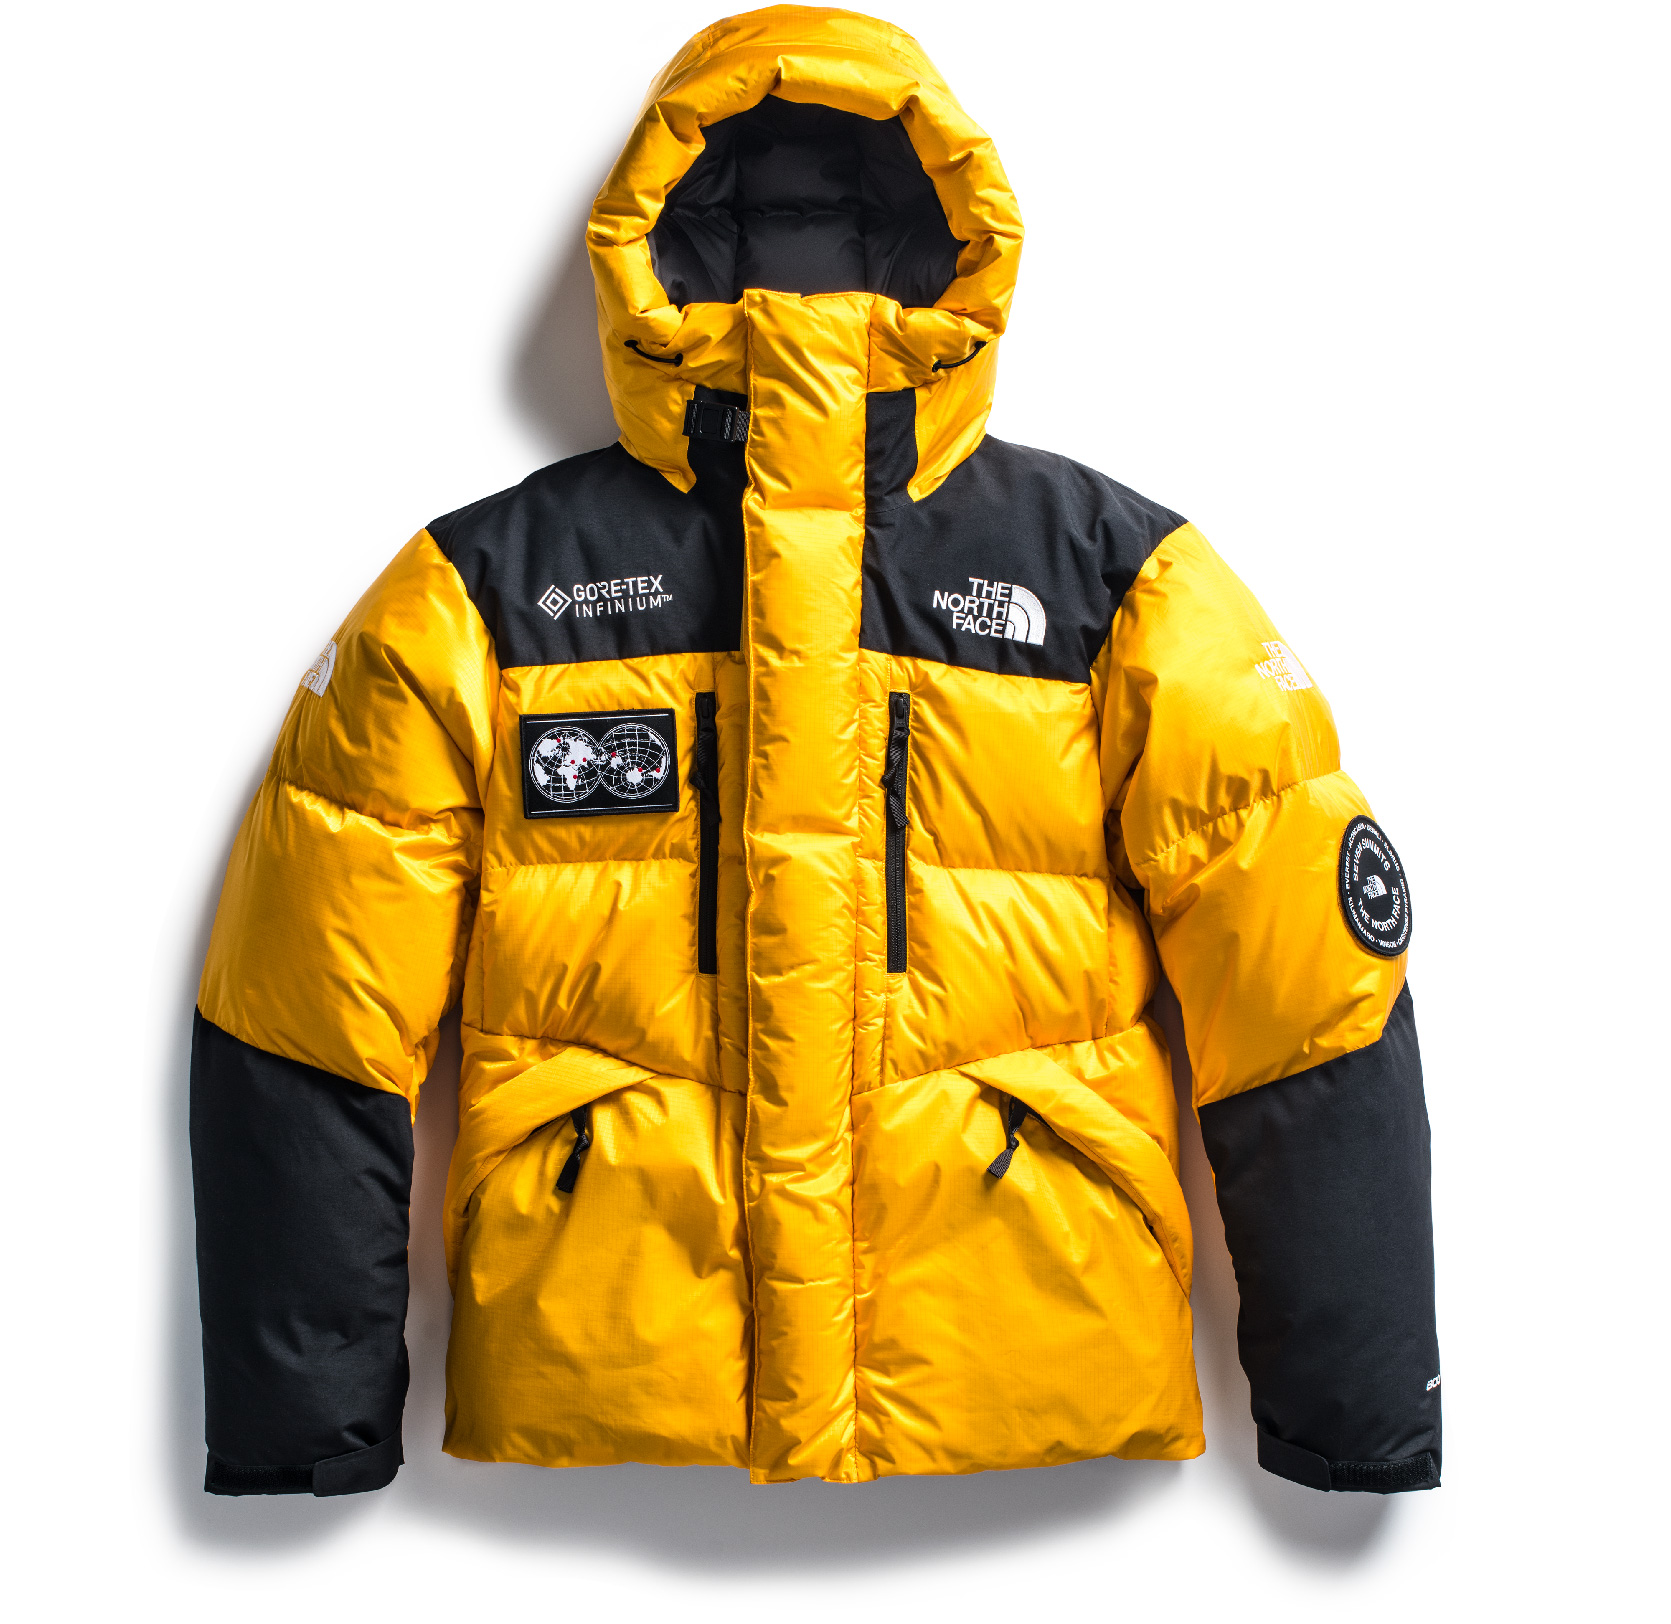 7SUMMITS COLLECTION | THE NORTH FACE